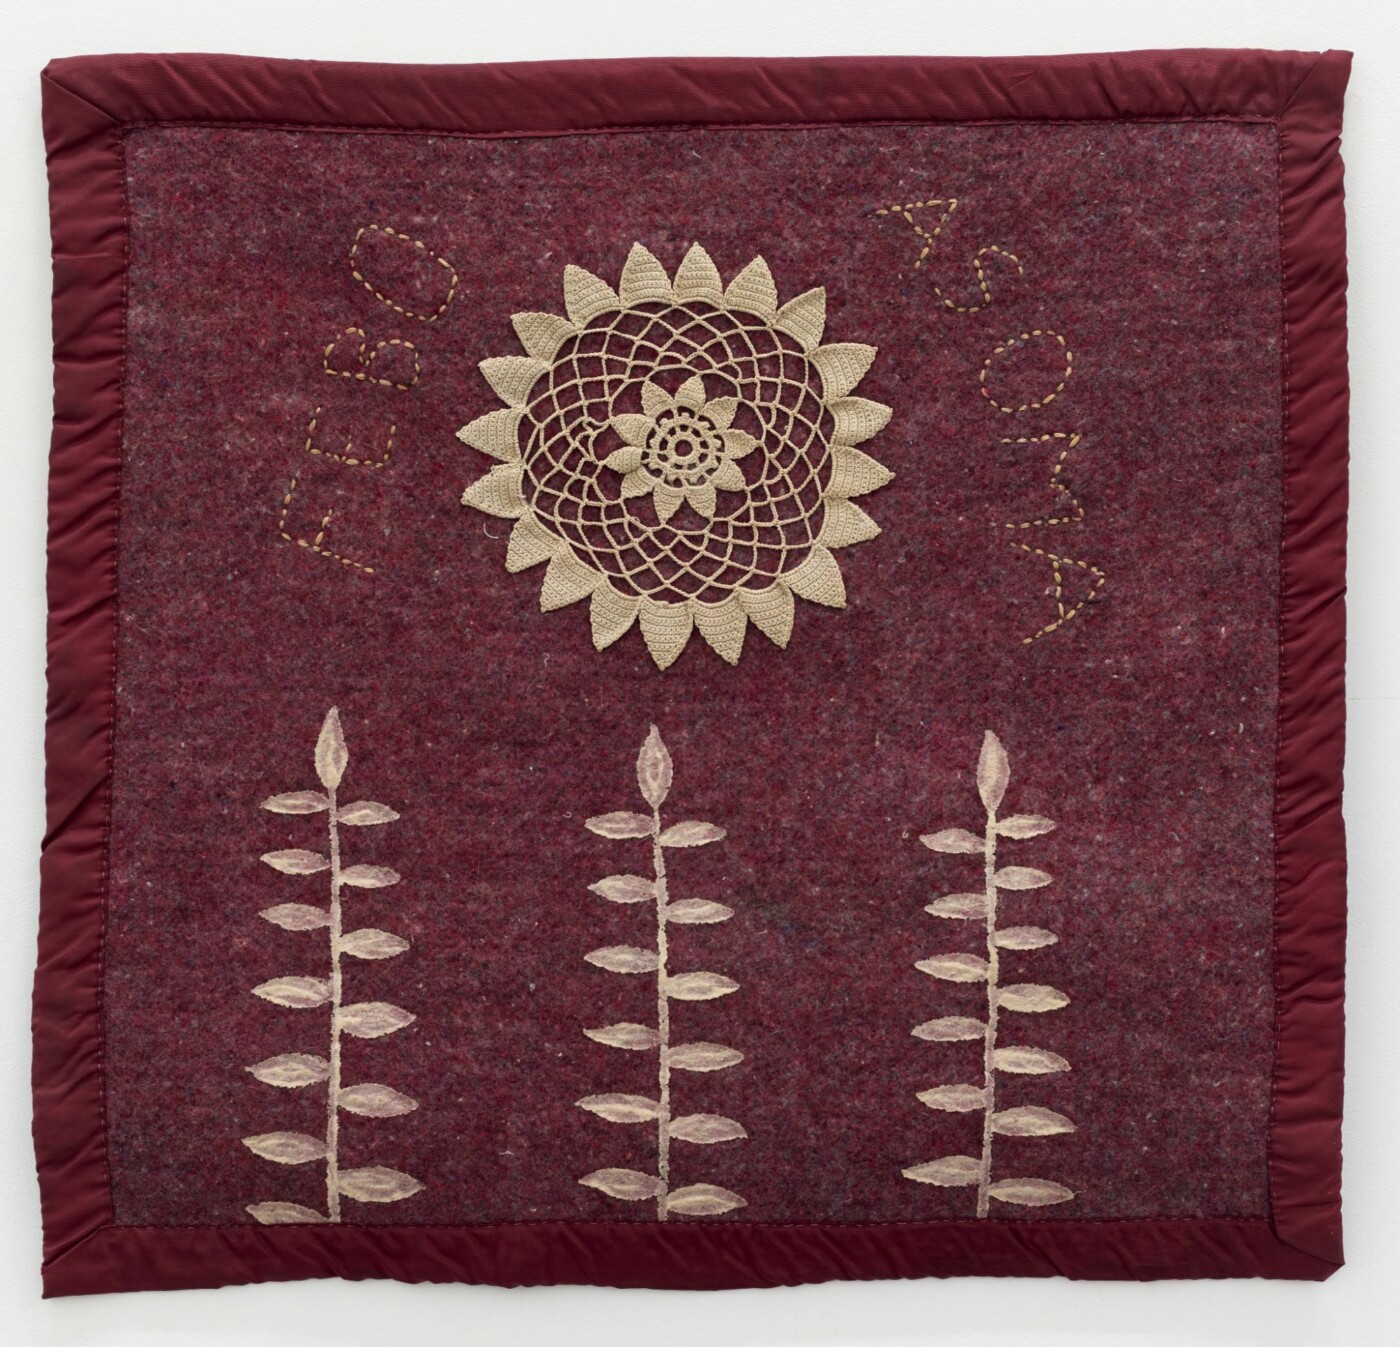 Dark red blanket with white stitched depictions of a sun and three vertical tree branches.